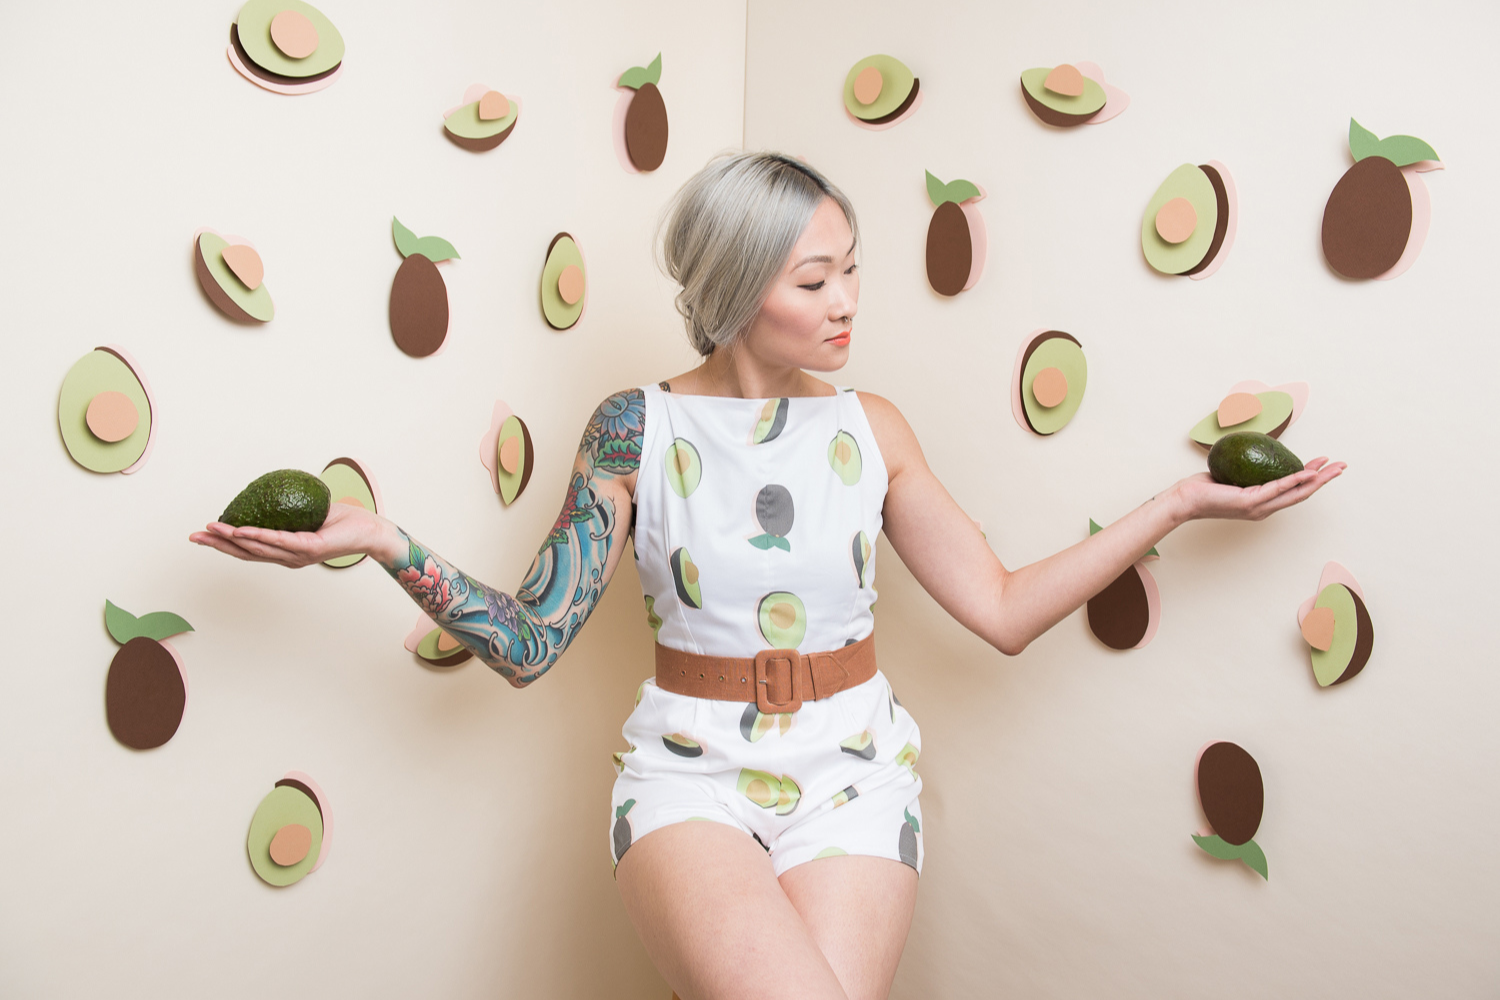 A model wears a romper with a white background featuring a design with both whole avocados as well as avocados cut in half showing their bright green pulp and brown pit. The model’s arms are both held out and each hand holds a whole avocado. The model is looking at the avocado on the left. Avocados constructed from paper, both whole and cut in half, are fixed to the walls behind the model to both the left and right. Caption: Model: Amy Vong. Photo: Kate Warren.